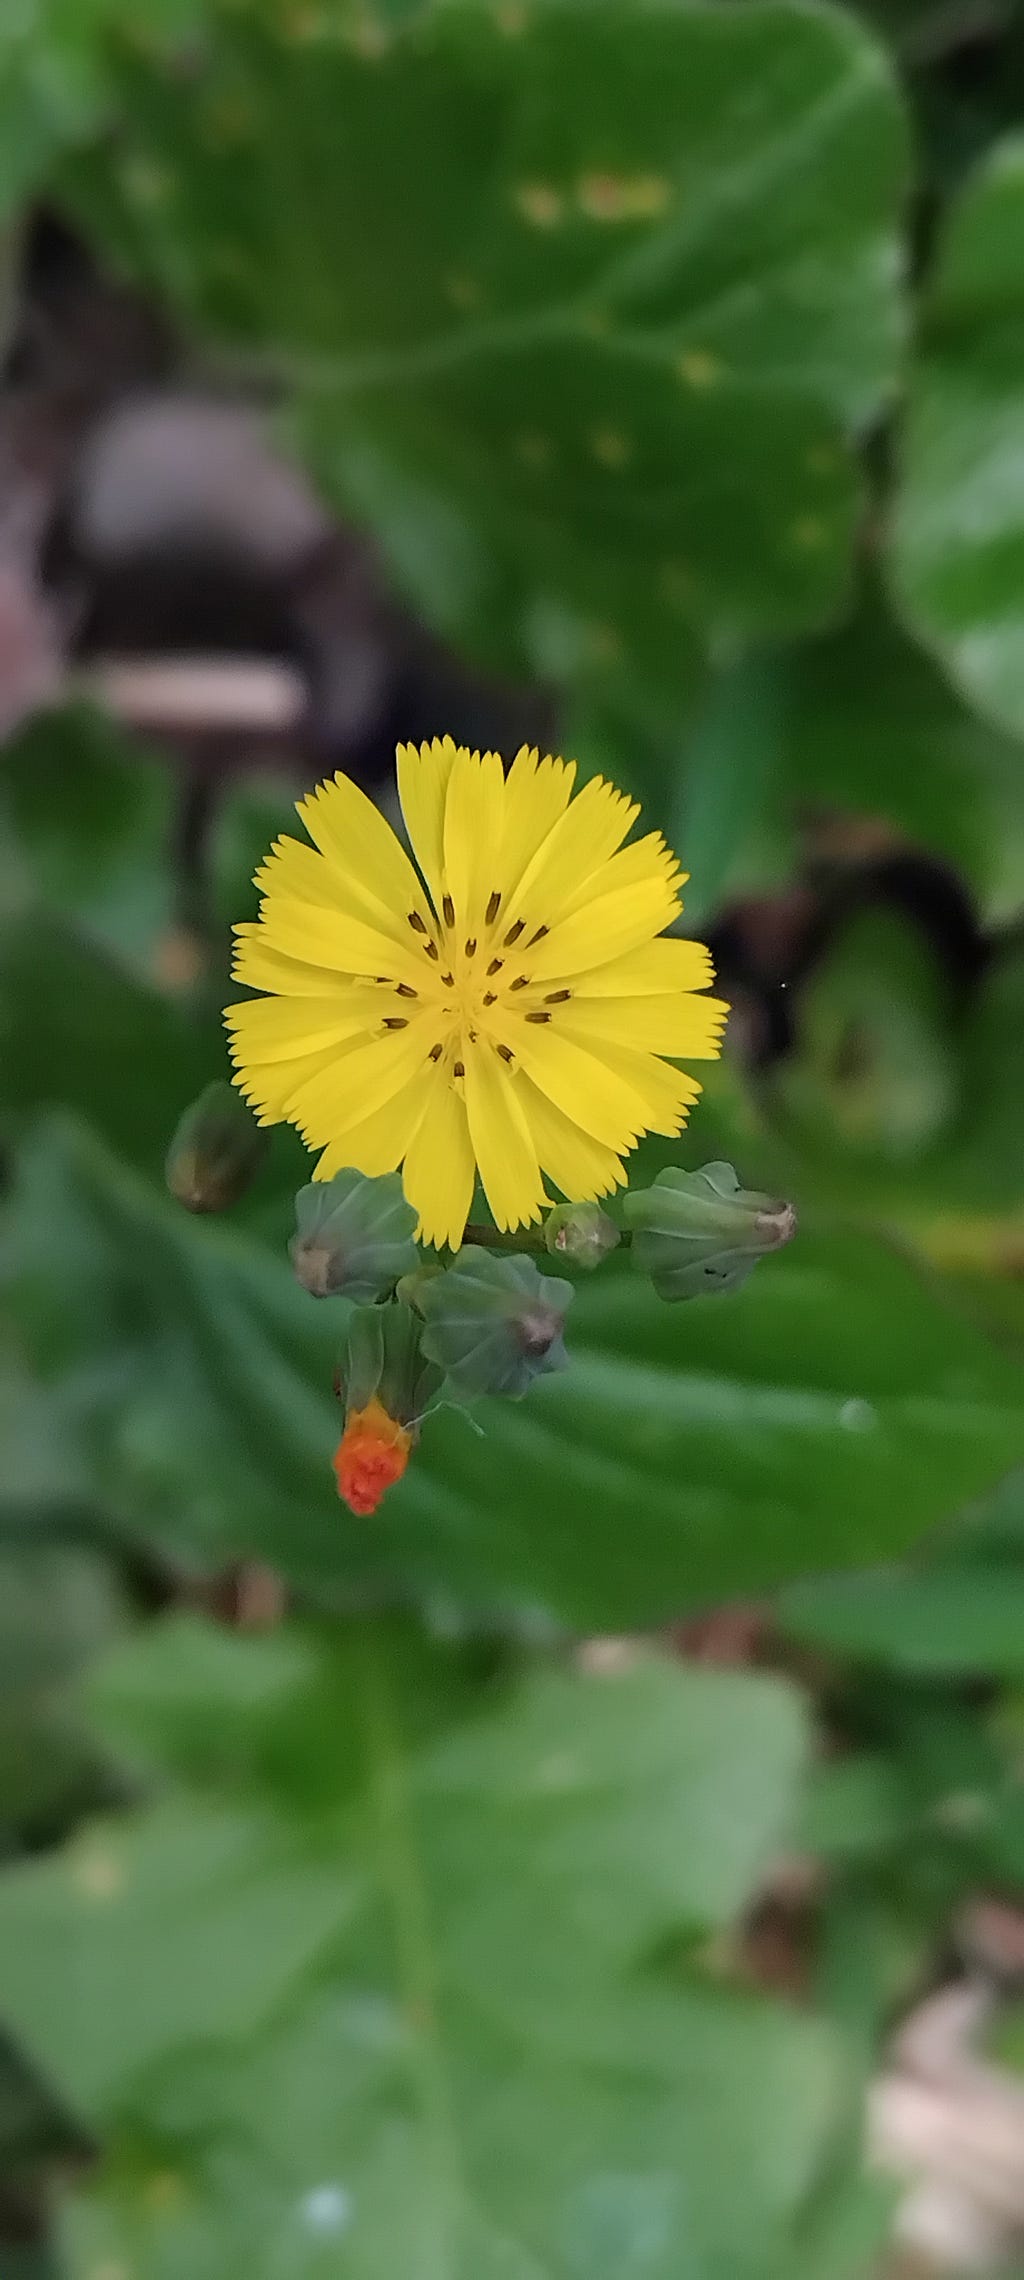 A macro image of a yellow flower and a background of large green leaves